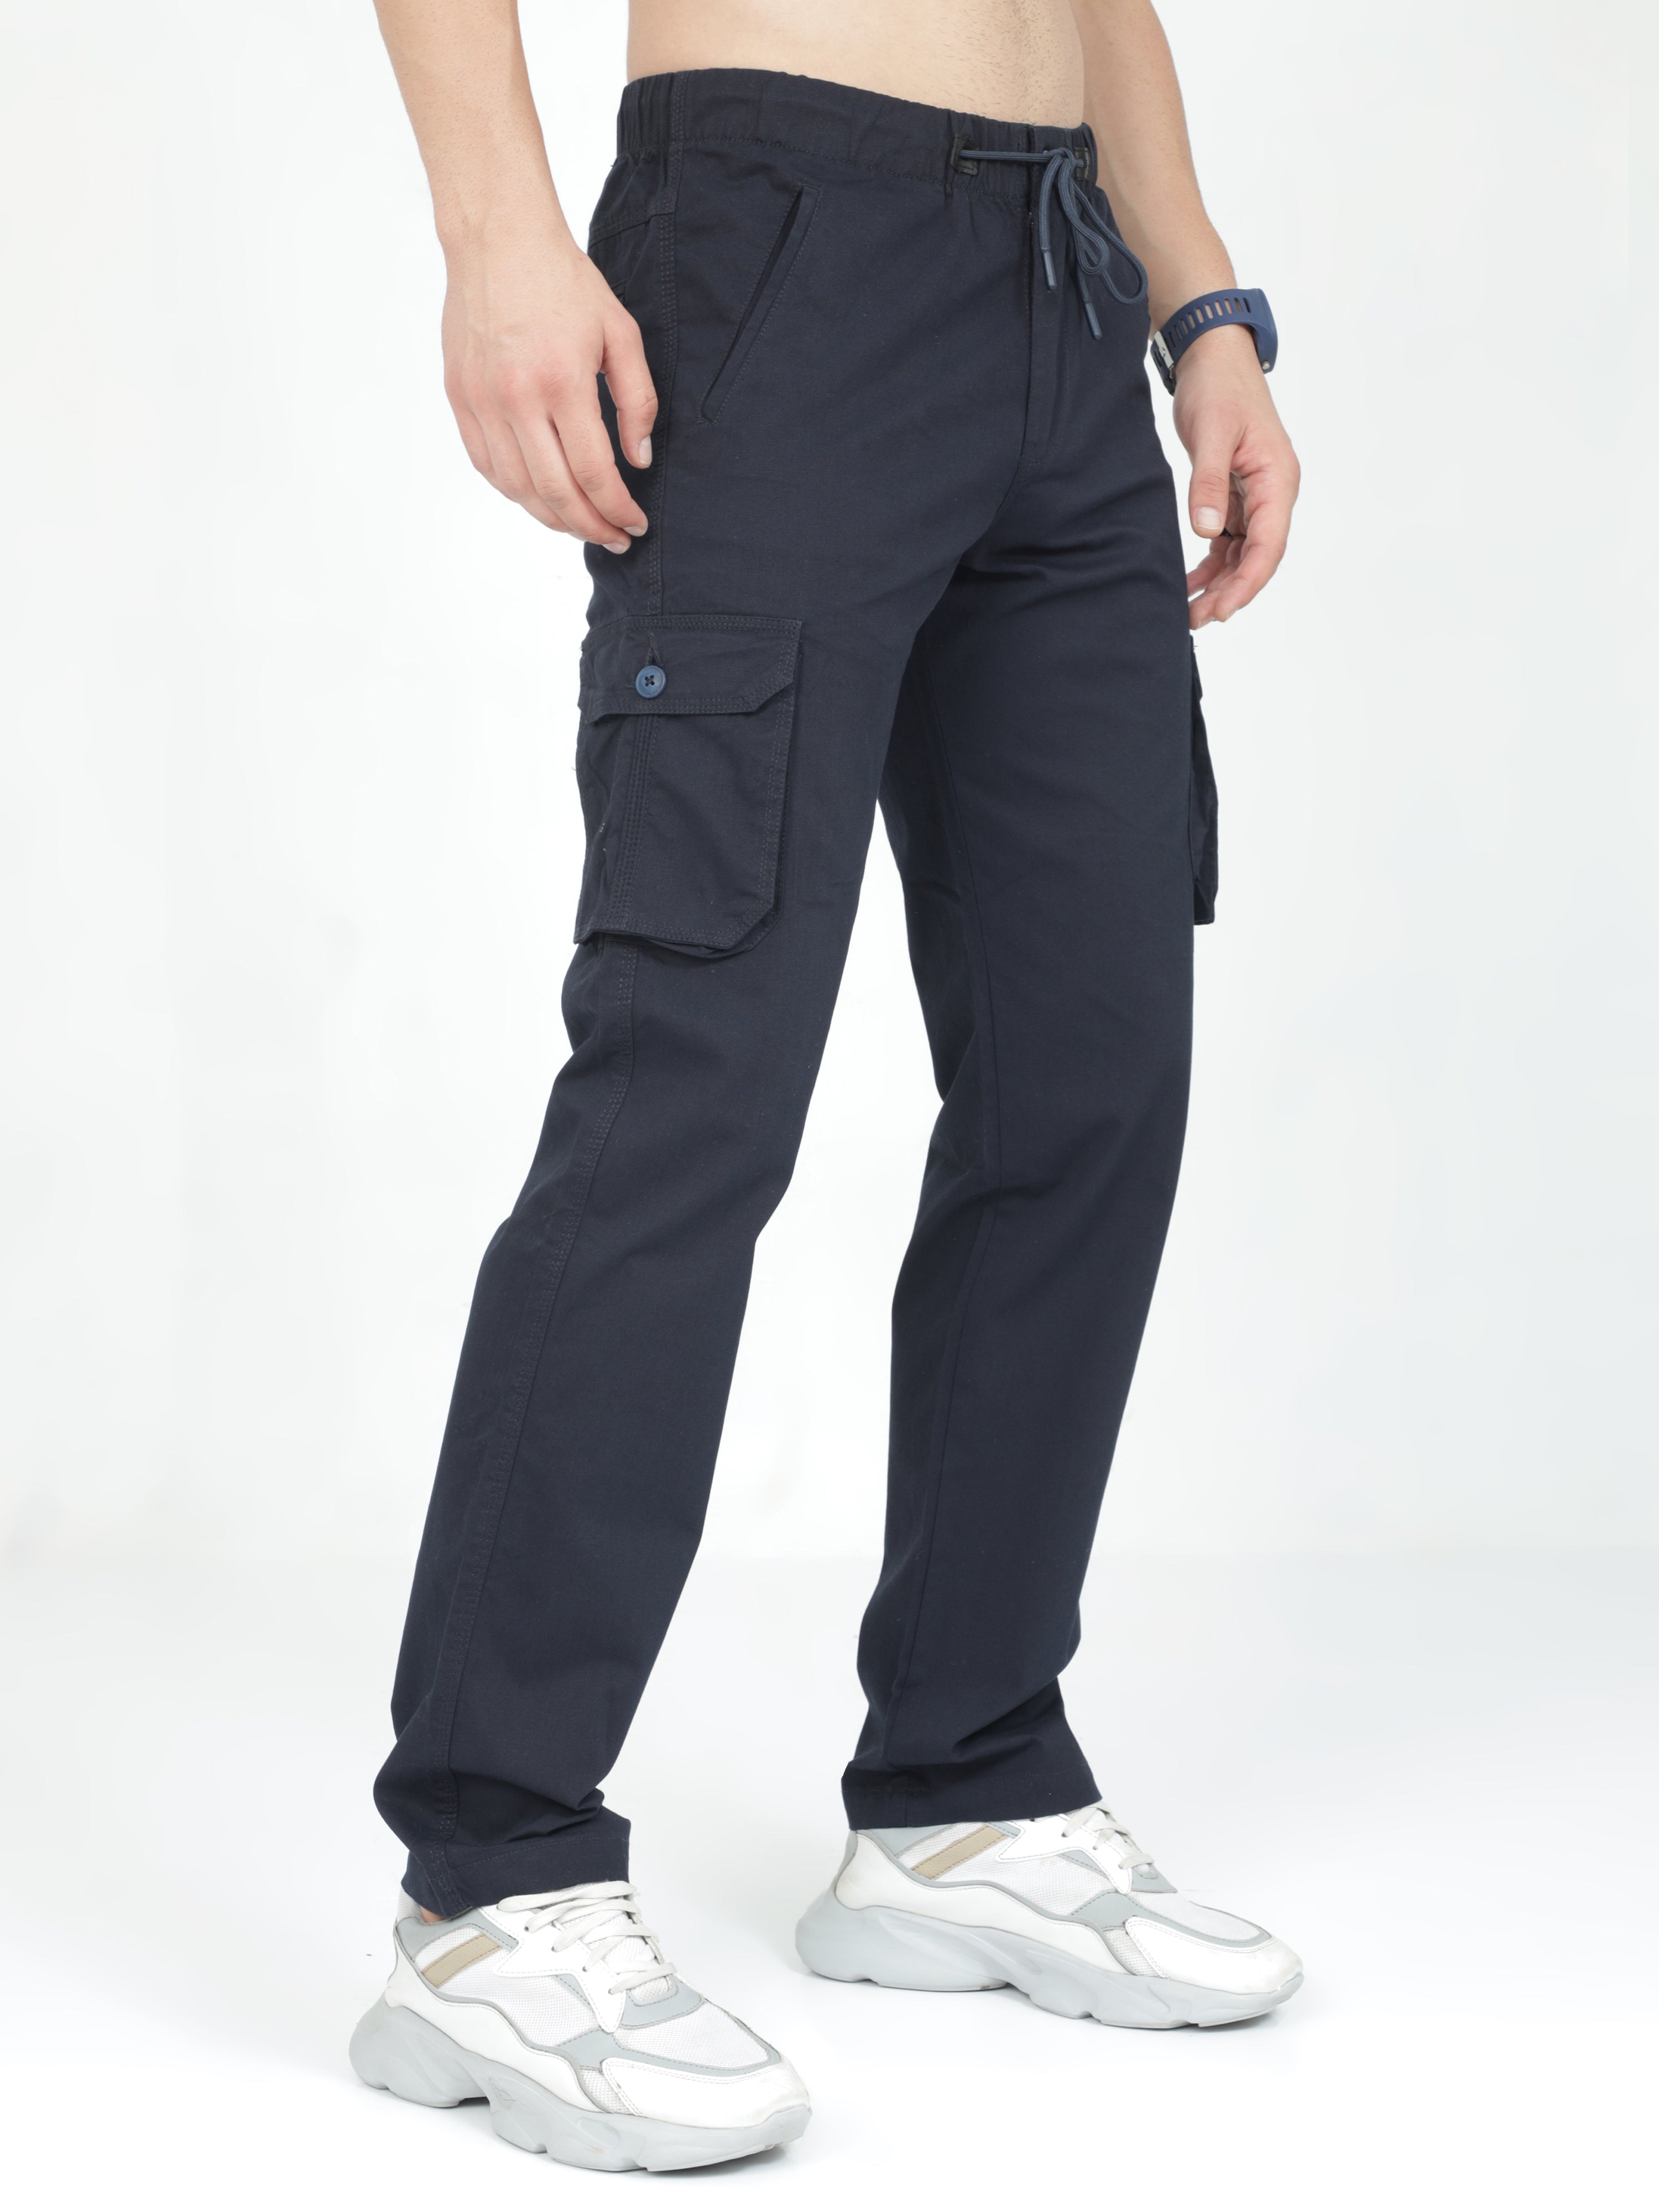 XFLWAM Men's Cargo Cargo Lightweight Work Pants Hiking Ripstop Cargo Pants  Relaxed Fit Mens Cargo Pant-Reg and Big and Tall Sizes Navy Blue L -  Walmart.com